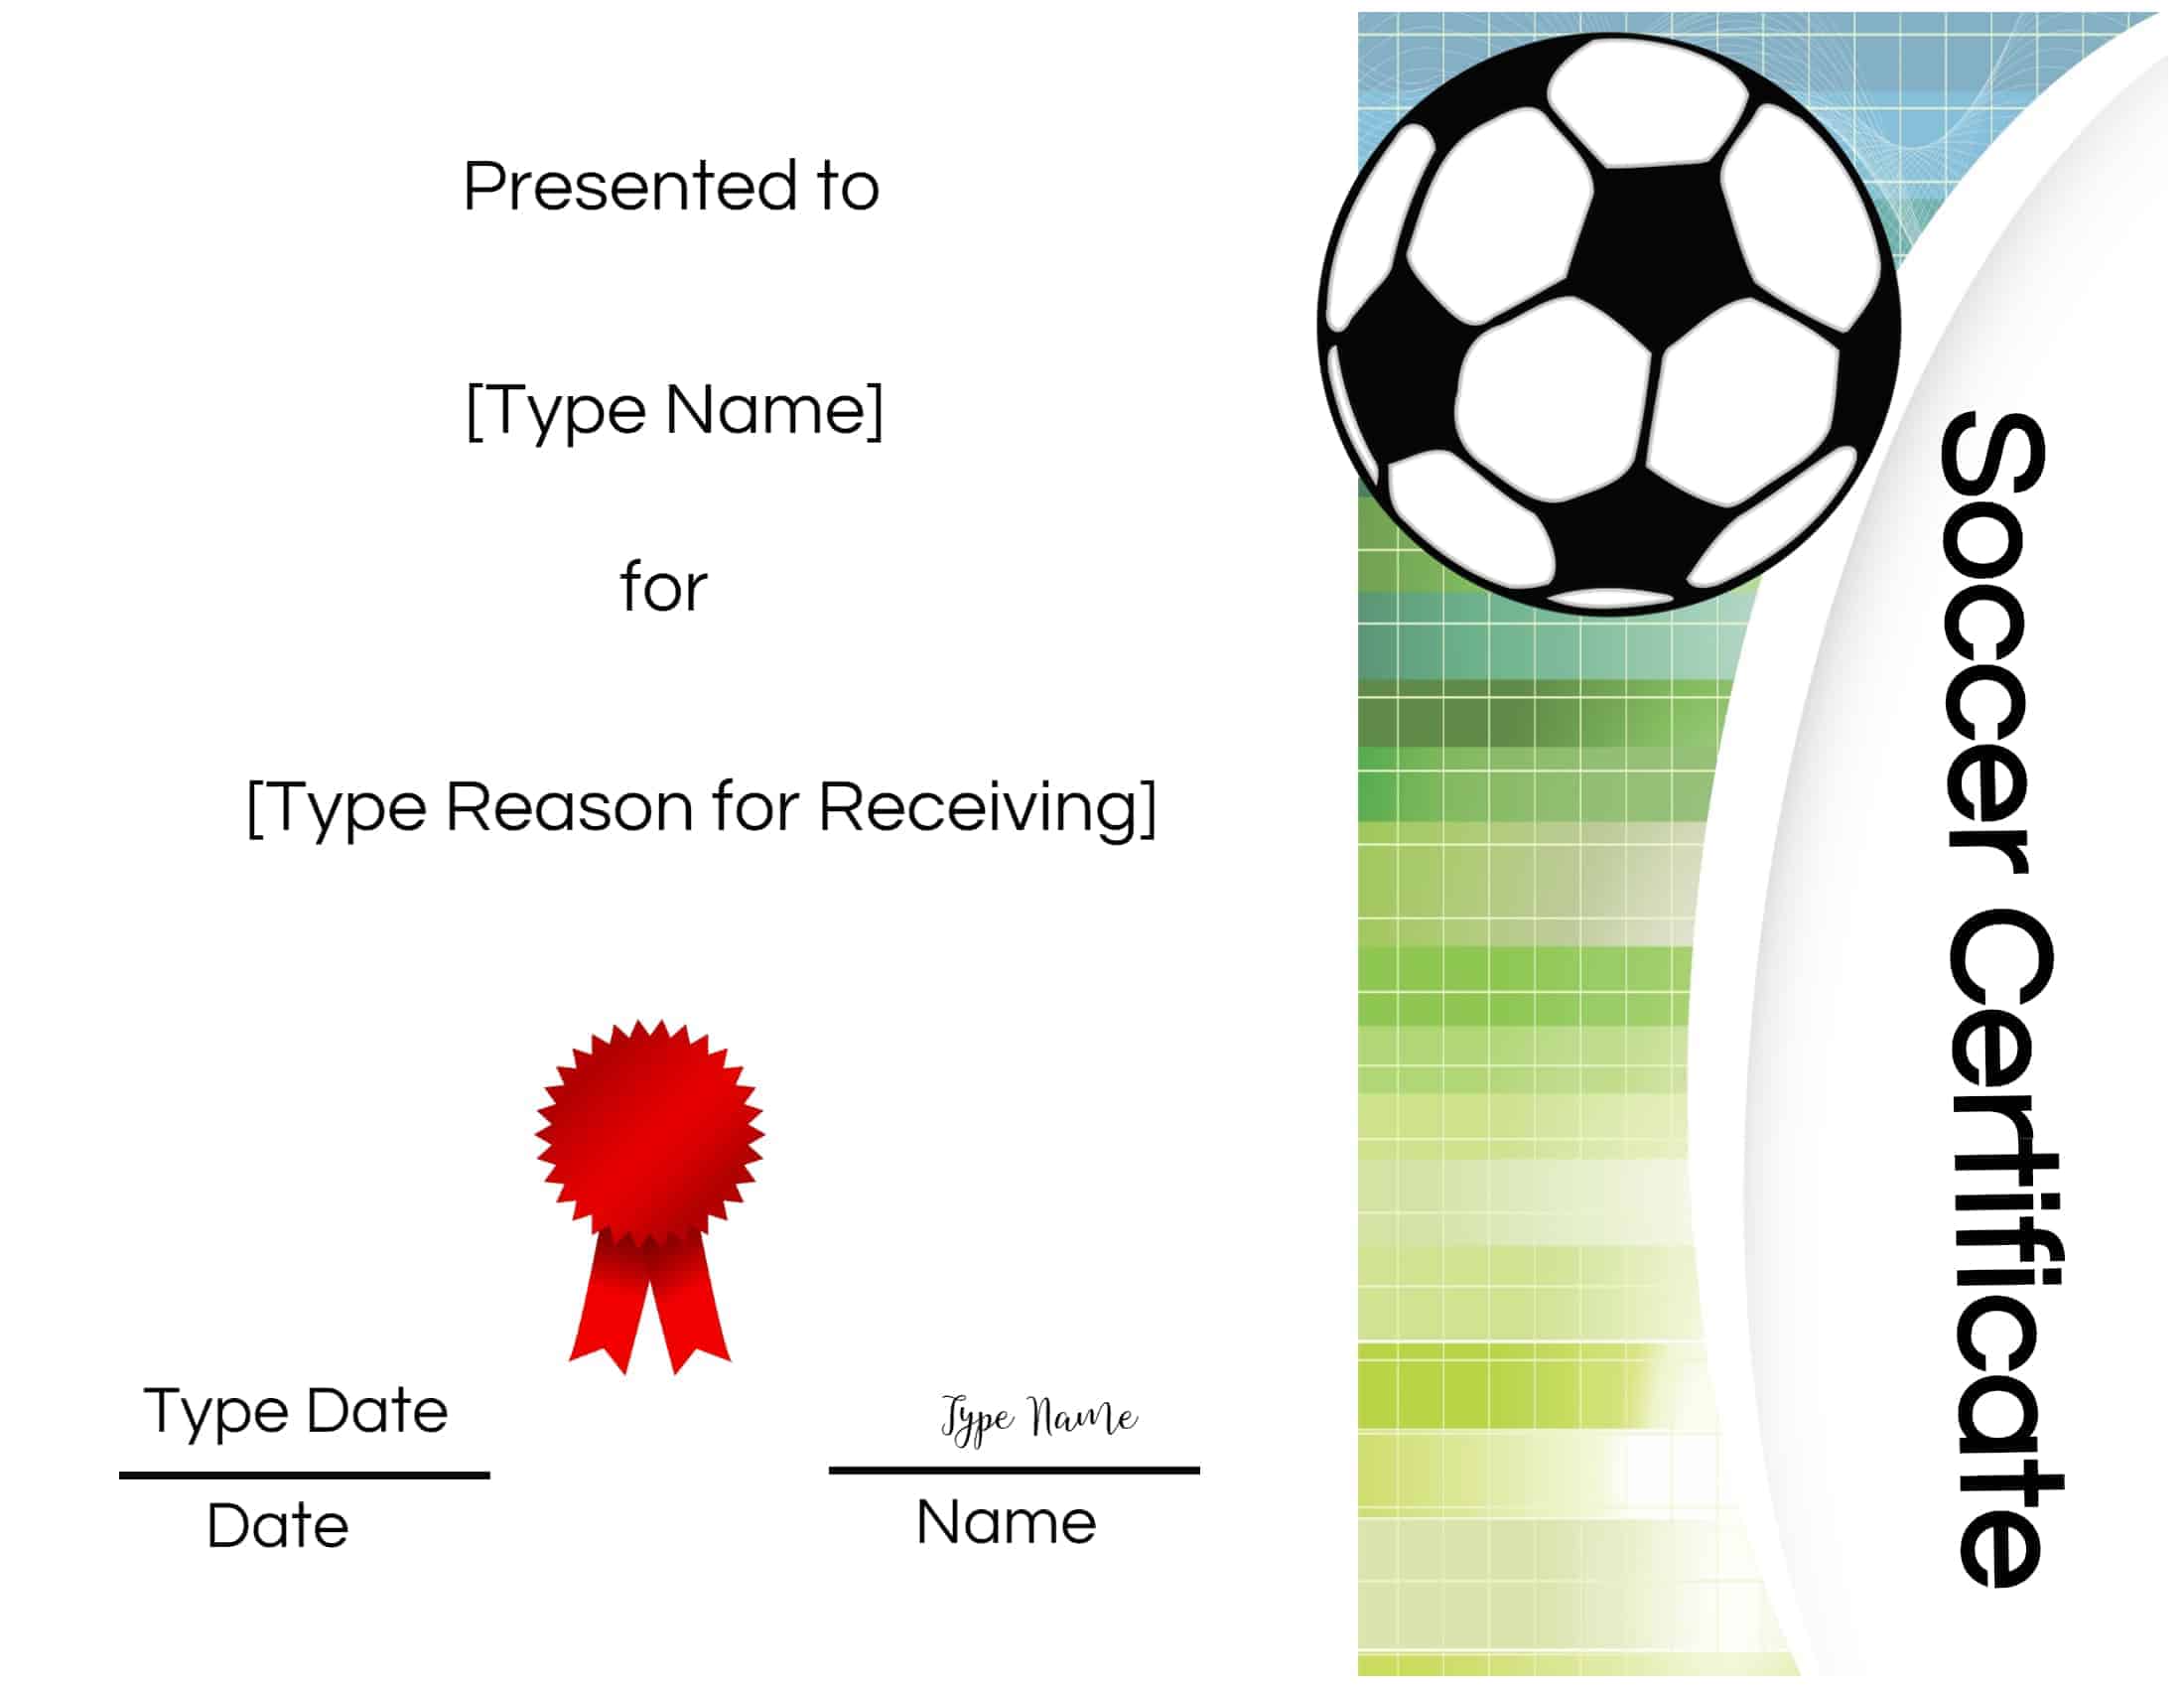 Free Soccer Certificate Maker Edit Online And Print At Home